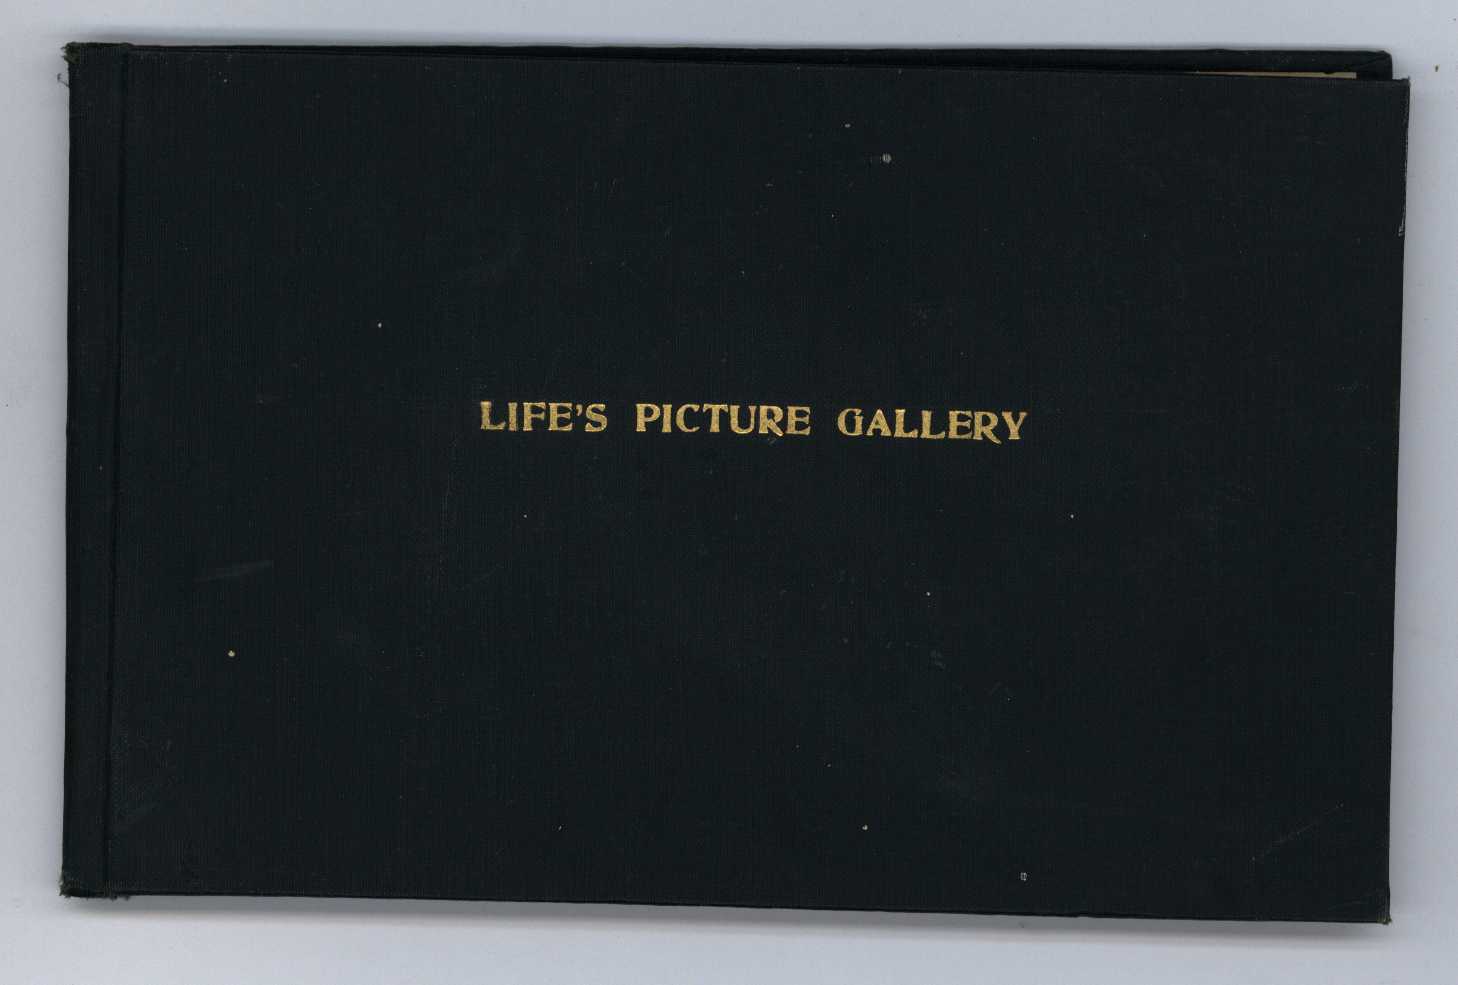 Lifes Picture Gallery